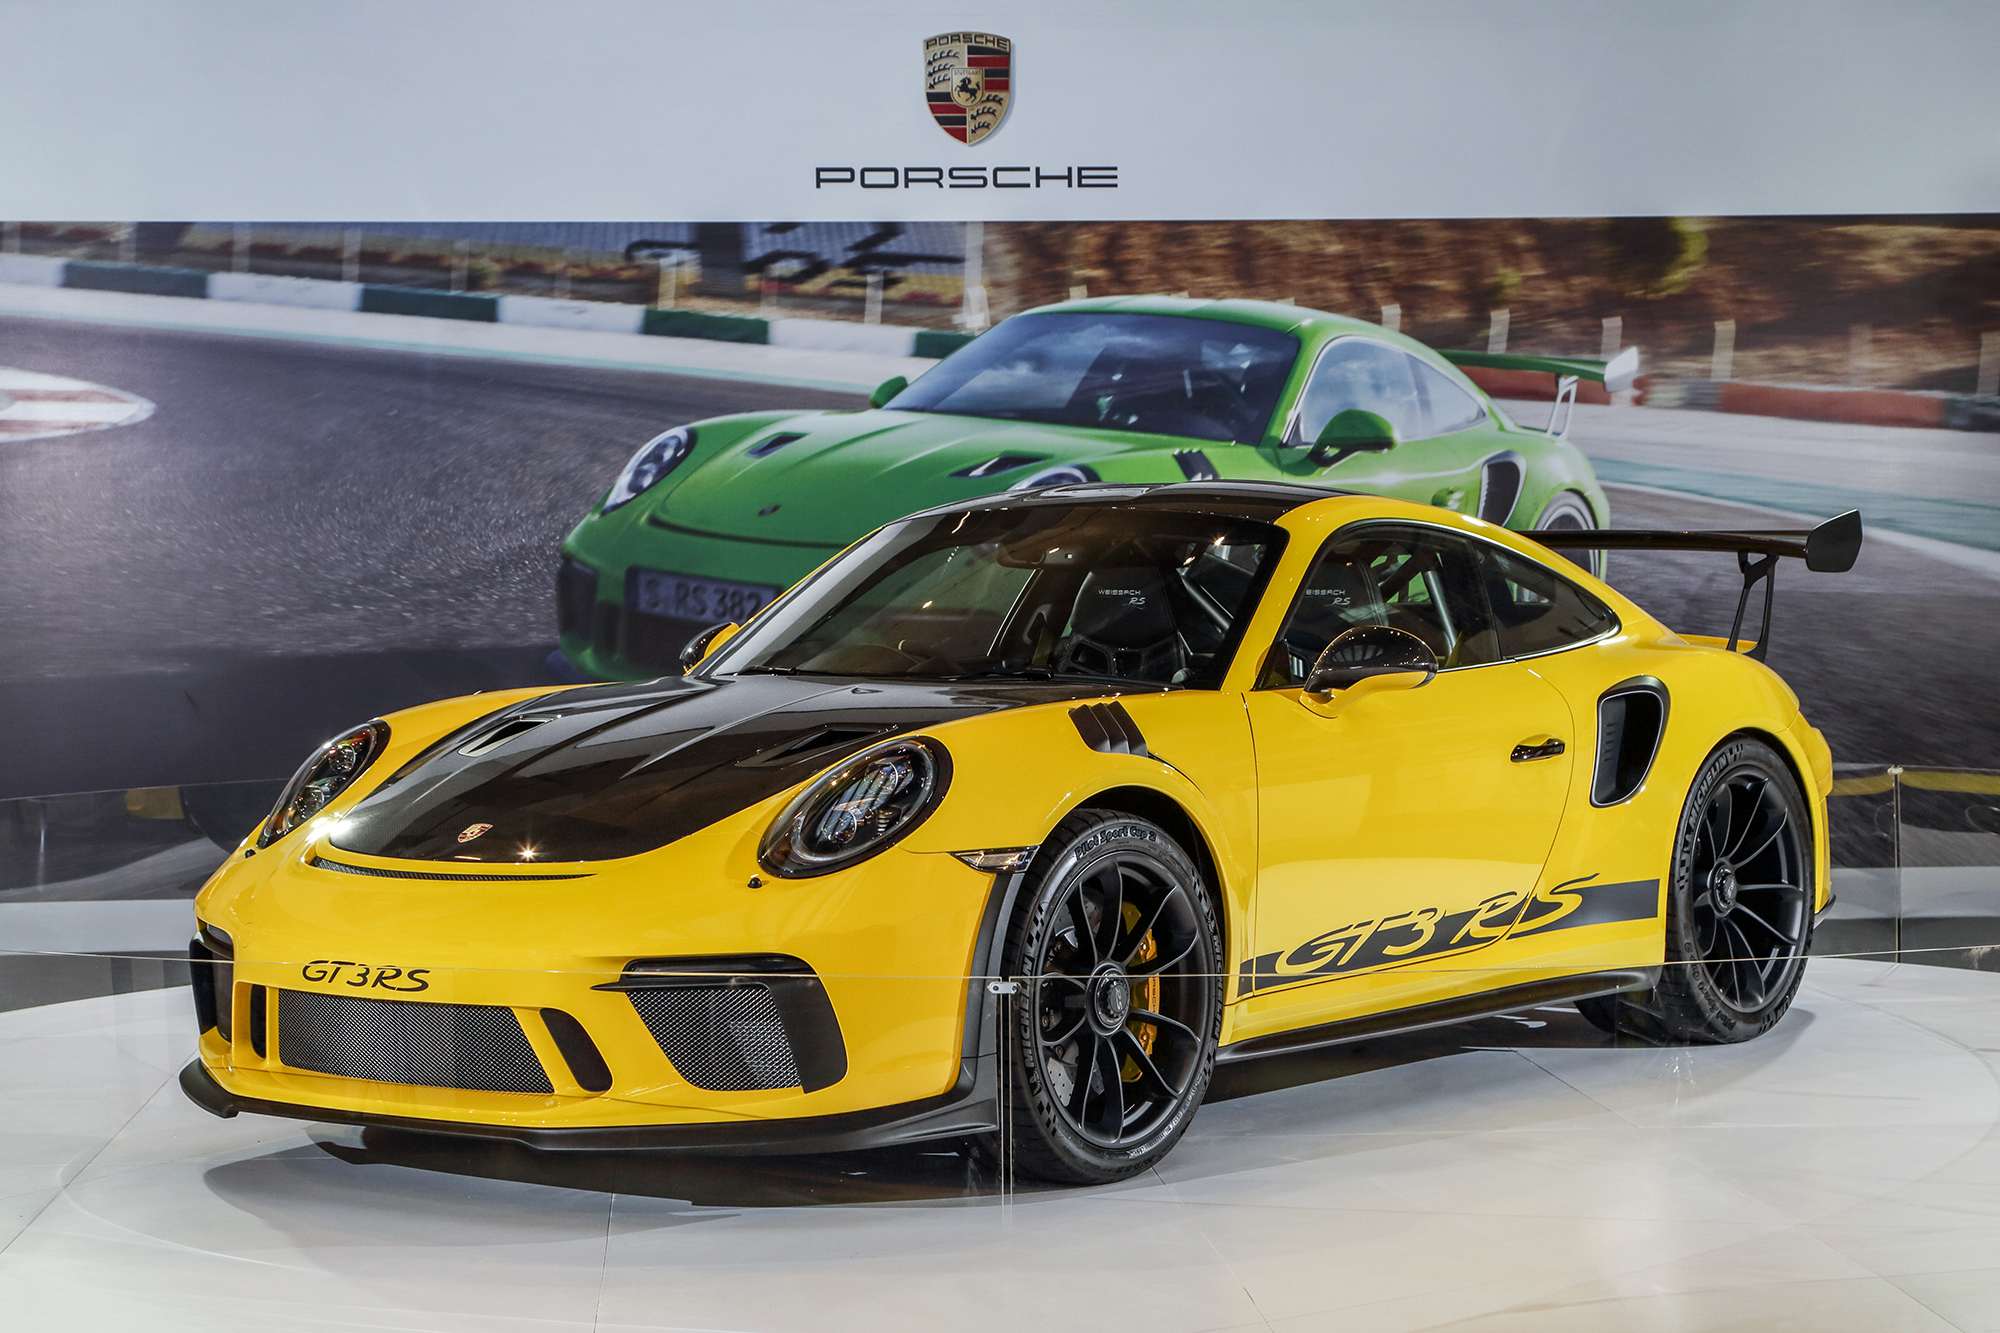 Gt4 gold. Porsche 911 gt. Porsche 911 gt3. Porsche 911 gt3 991.2. Порше 911 gt3 RS.